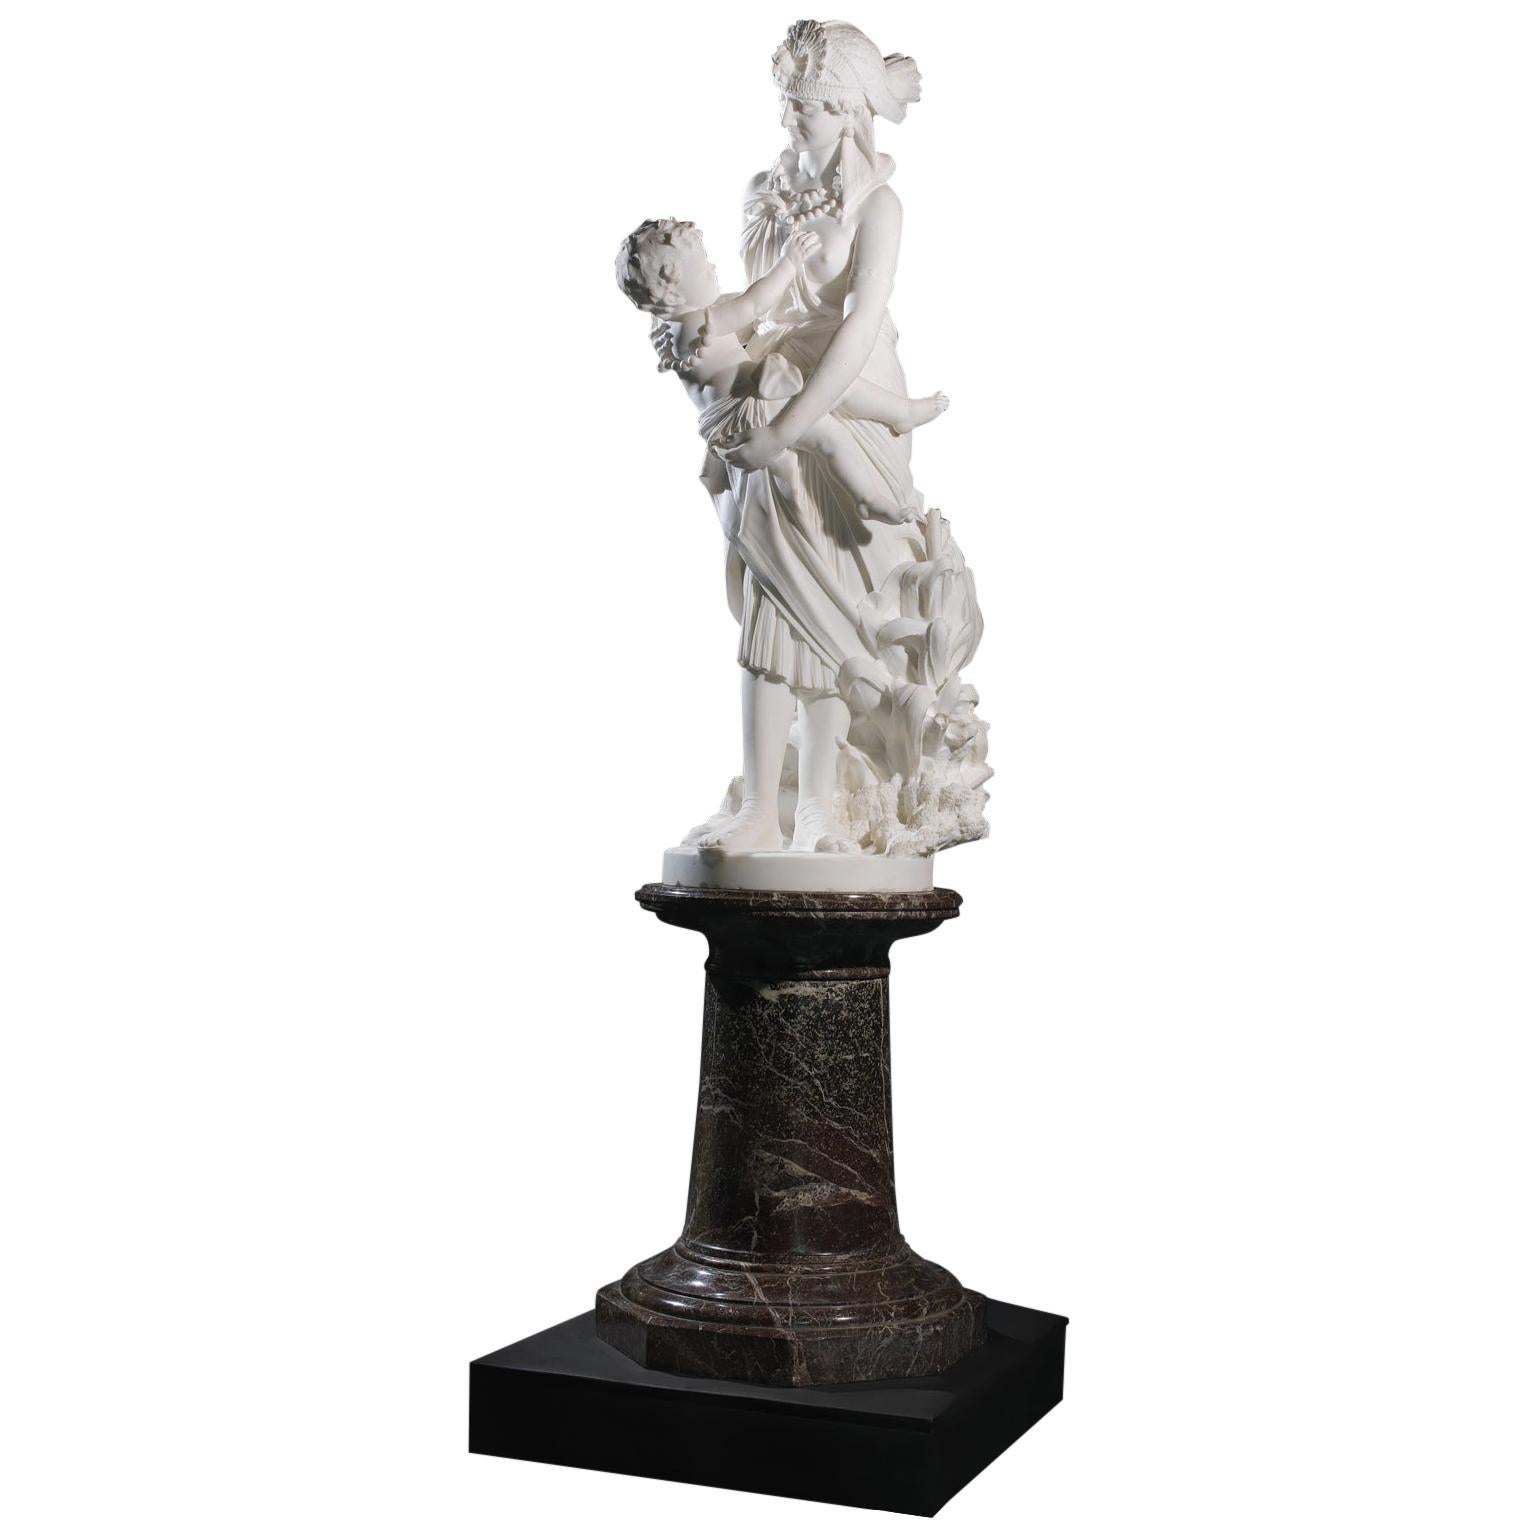 ‘The Finding of Moses’, a Marble Figural Group by Pietro Bazzanti, circa 1870